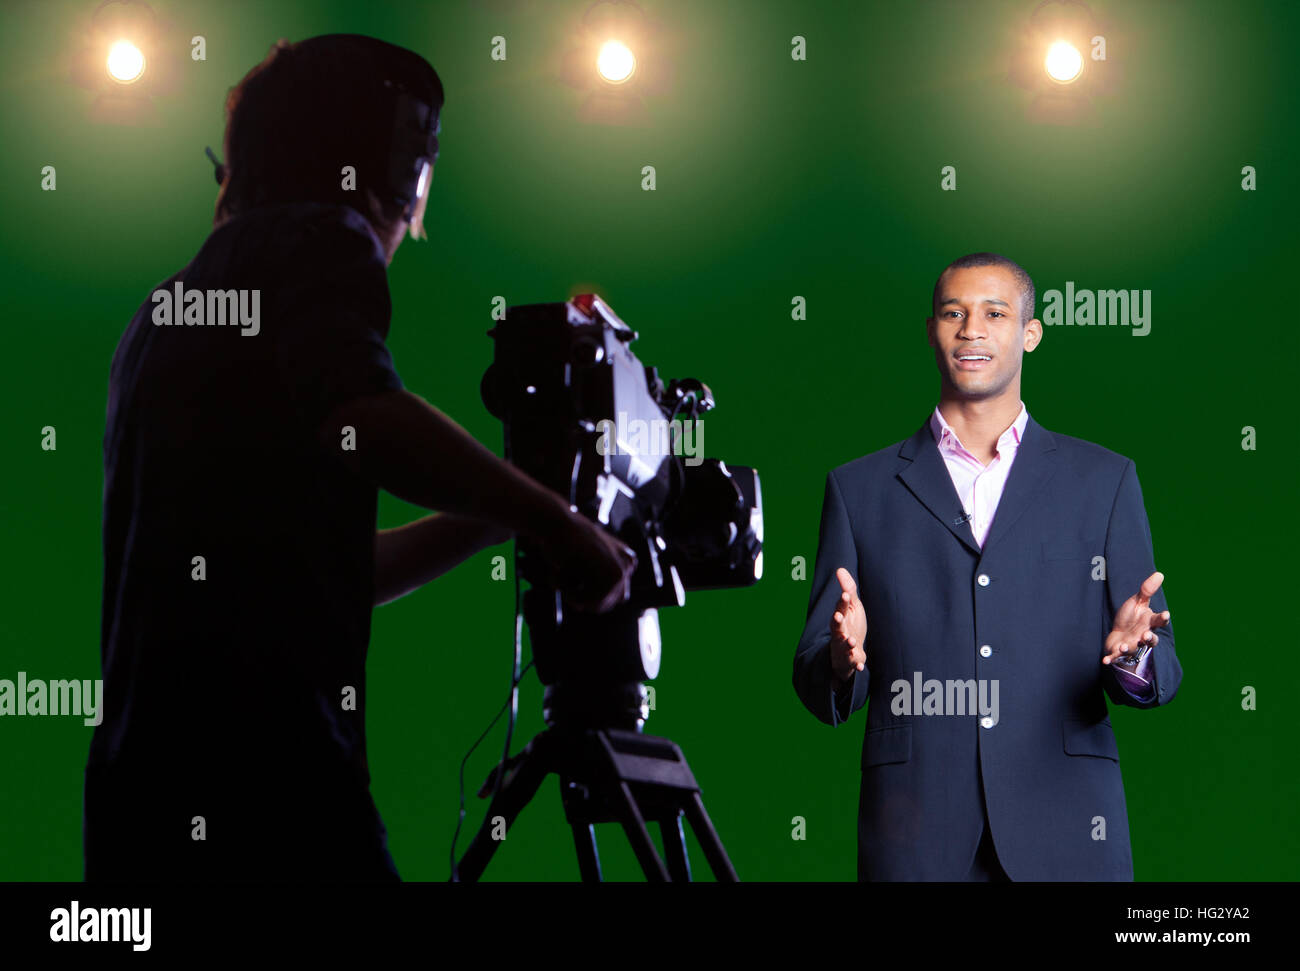 Presenter talking to camera in a green screen studio with silhouetted cameraman in foreground and studio lights in the background. Stock Photo